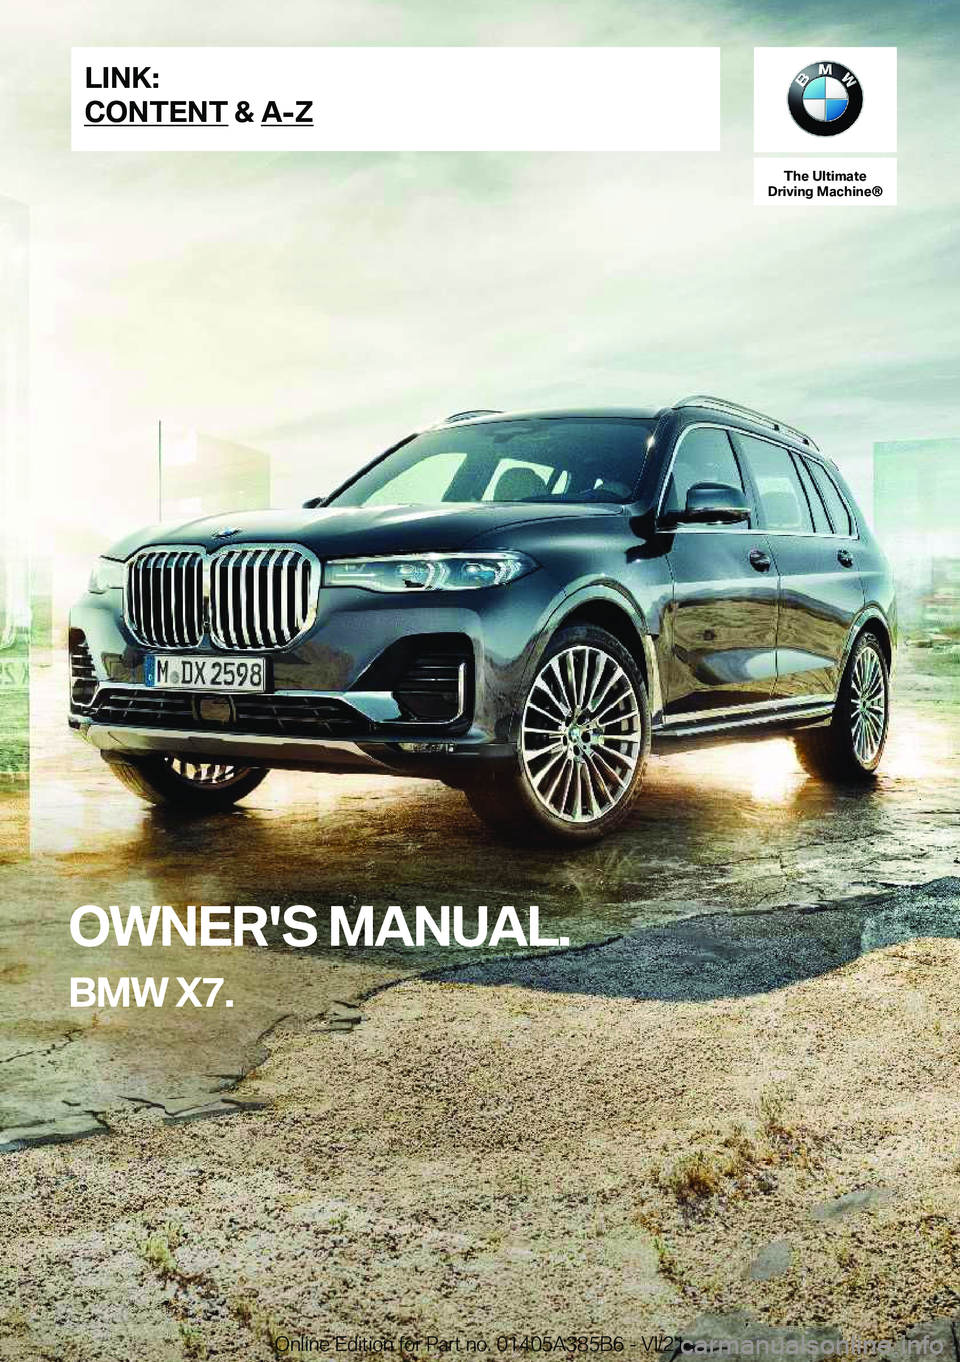 BMW X7 2022  Owners Manual �T�h�e��U�l�t�i�m�a�t�e
�D�r�i�v�i�n�g��M�a�c�h�i�n�e�n
�O�W�N�E�R�'�S��M�A�N�U�A�L�.
�B�M�W��X�7�.�L�I�N�K�:
�C�O�N�T�E�N�T��&��A�-�Z�O�n�l�i�n�e��E�d�i�t�i�o�n��f�o�r��P�a�r�t��n�o�.�